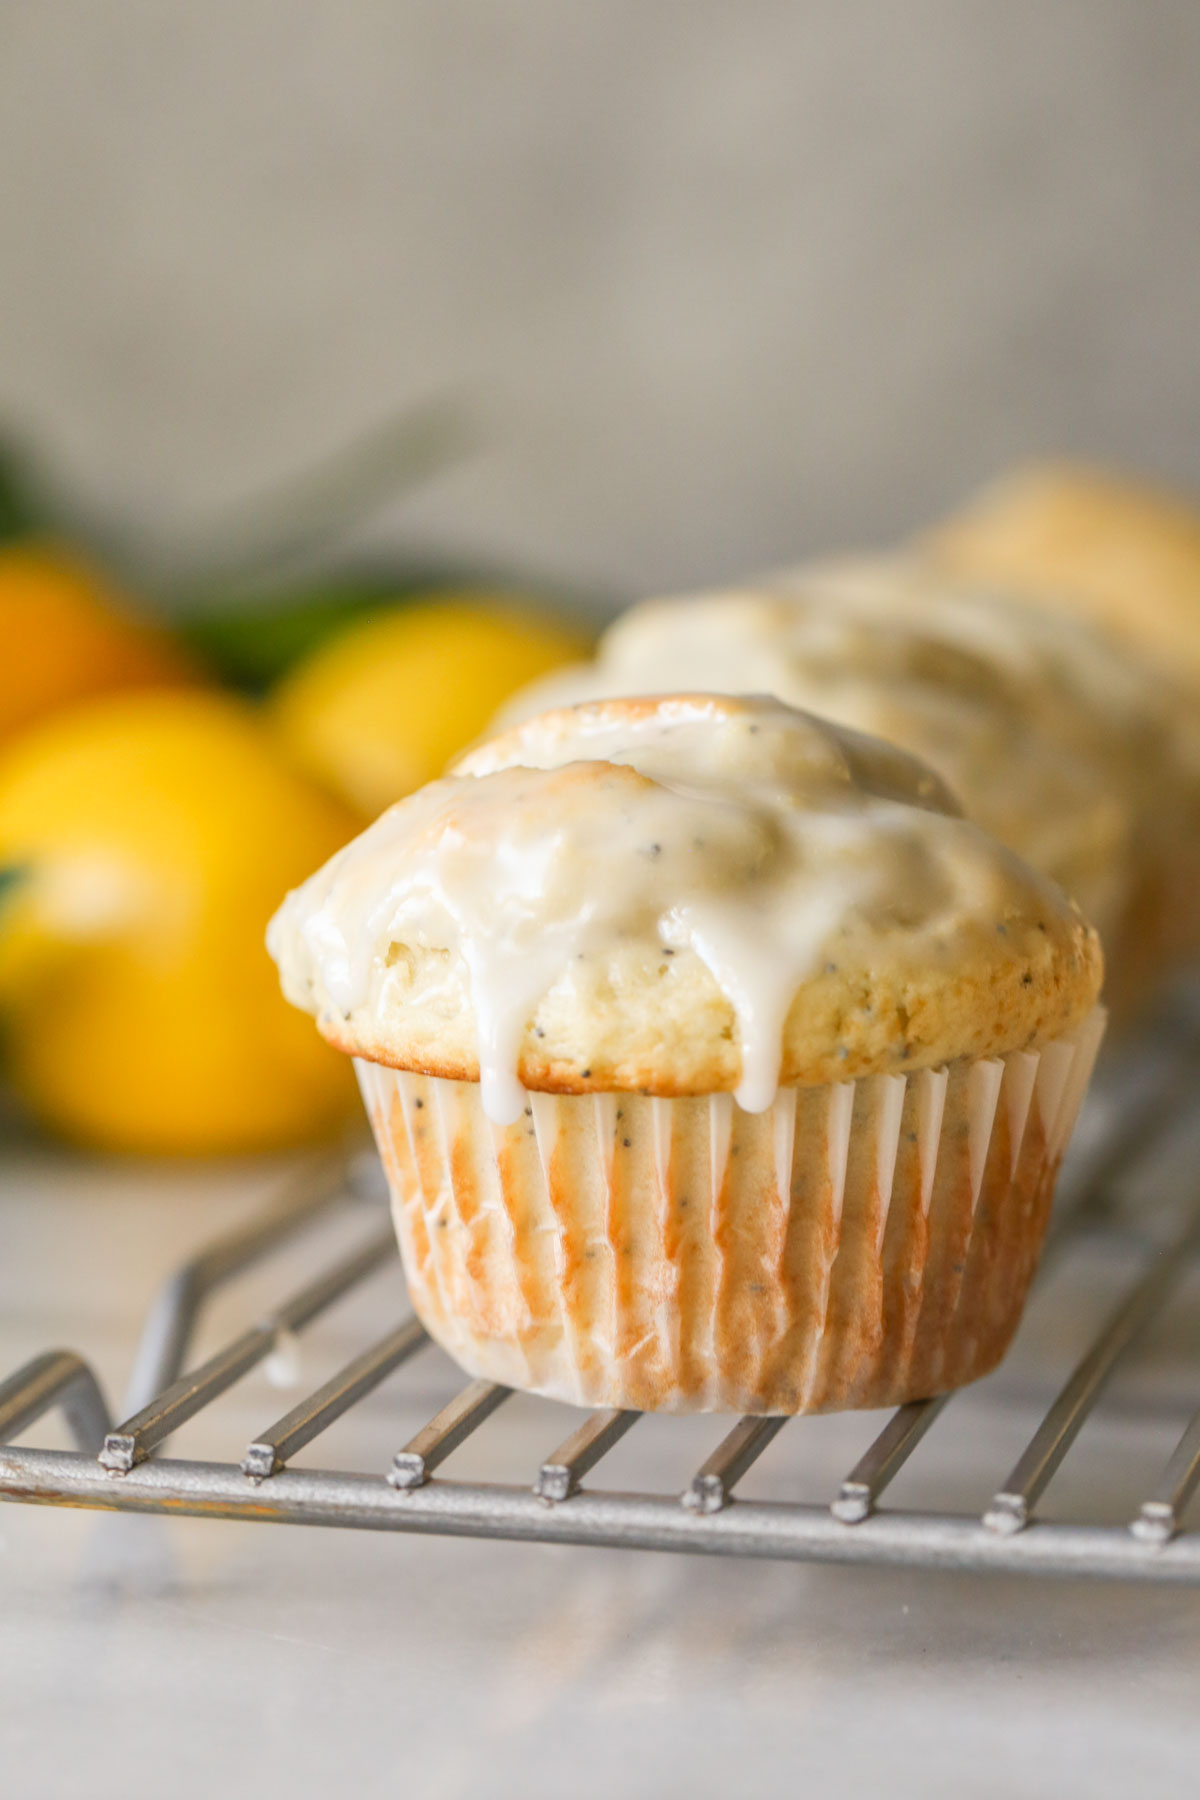 Close up shot of a Glazed Lemon Poppy Seed Muffin on a cooling rack.  